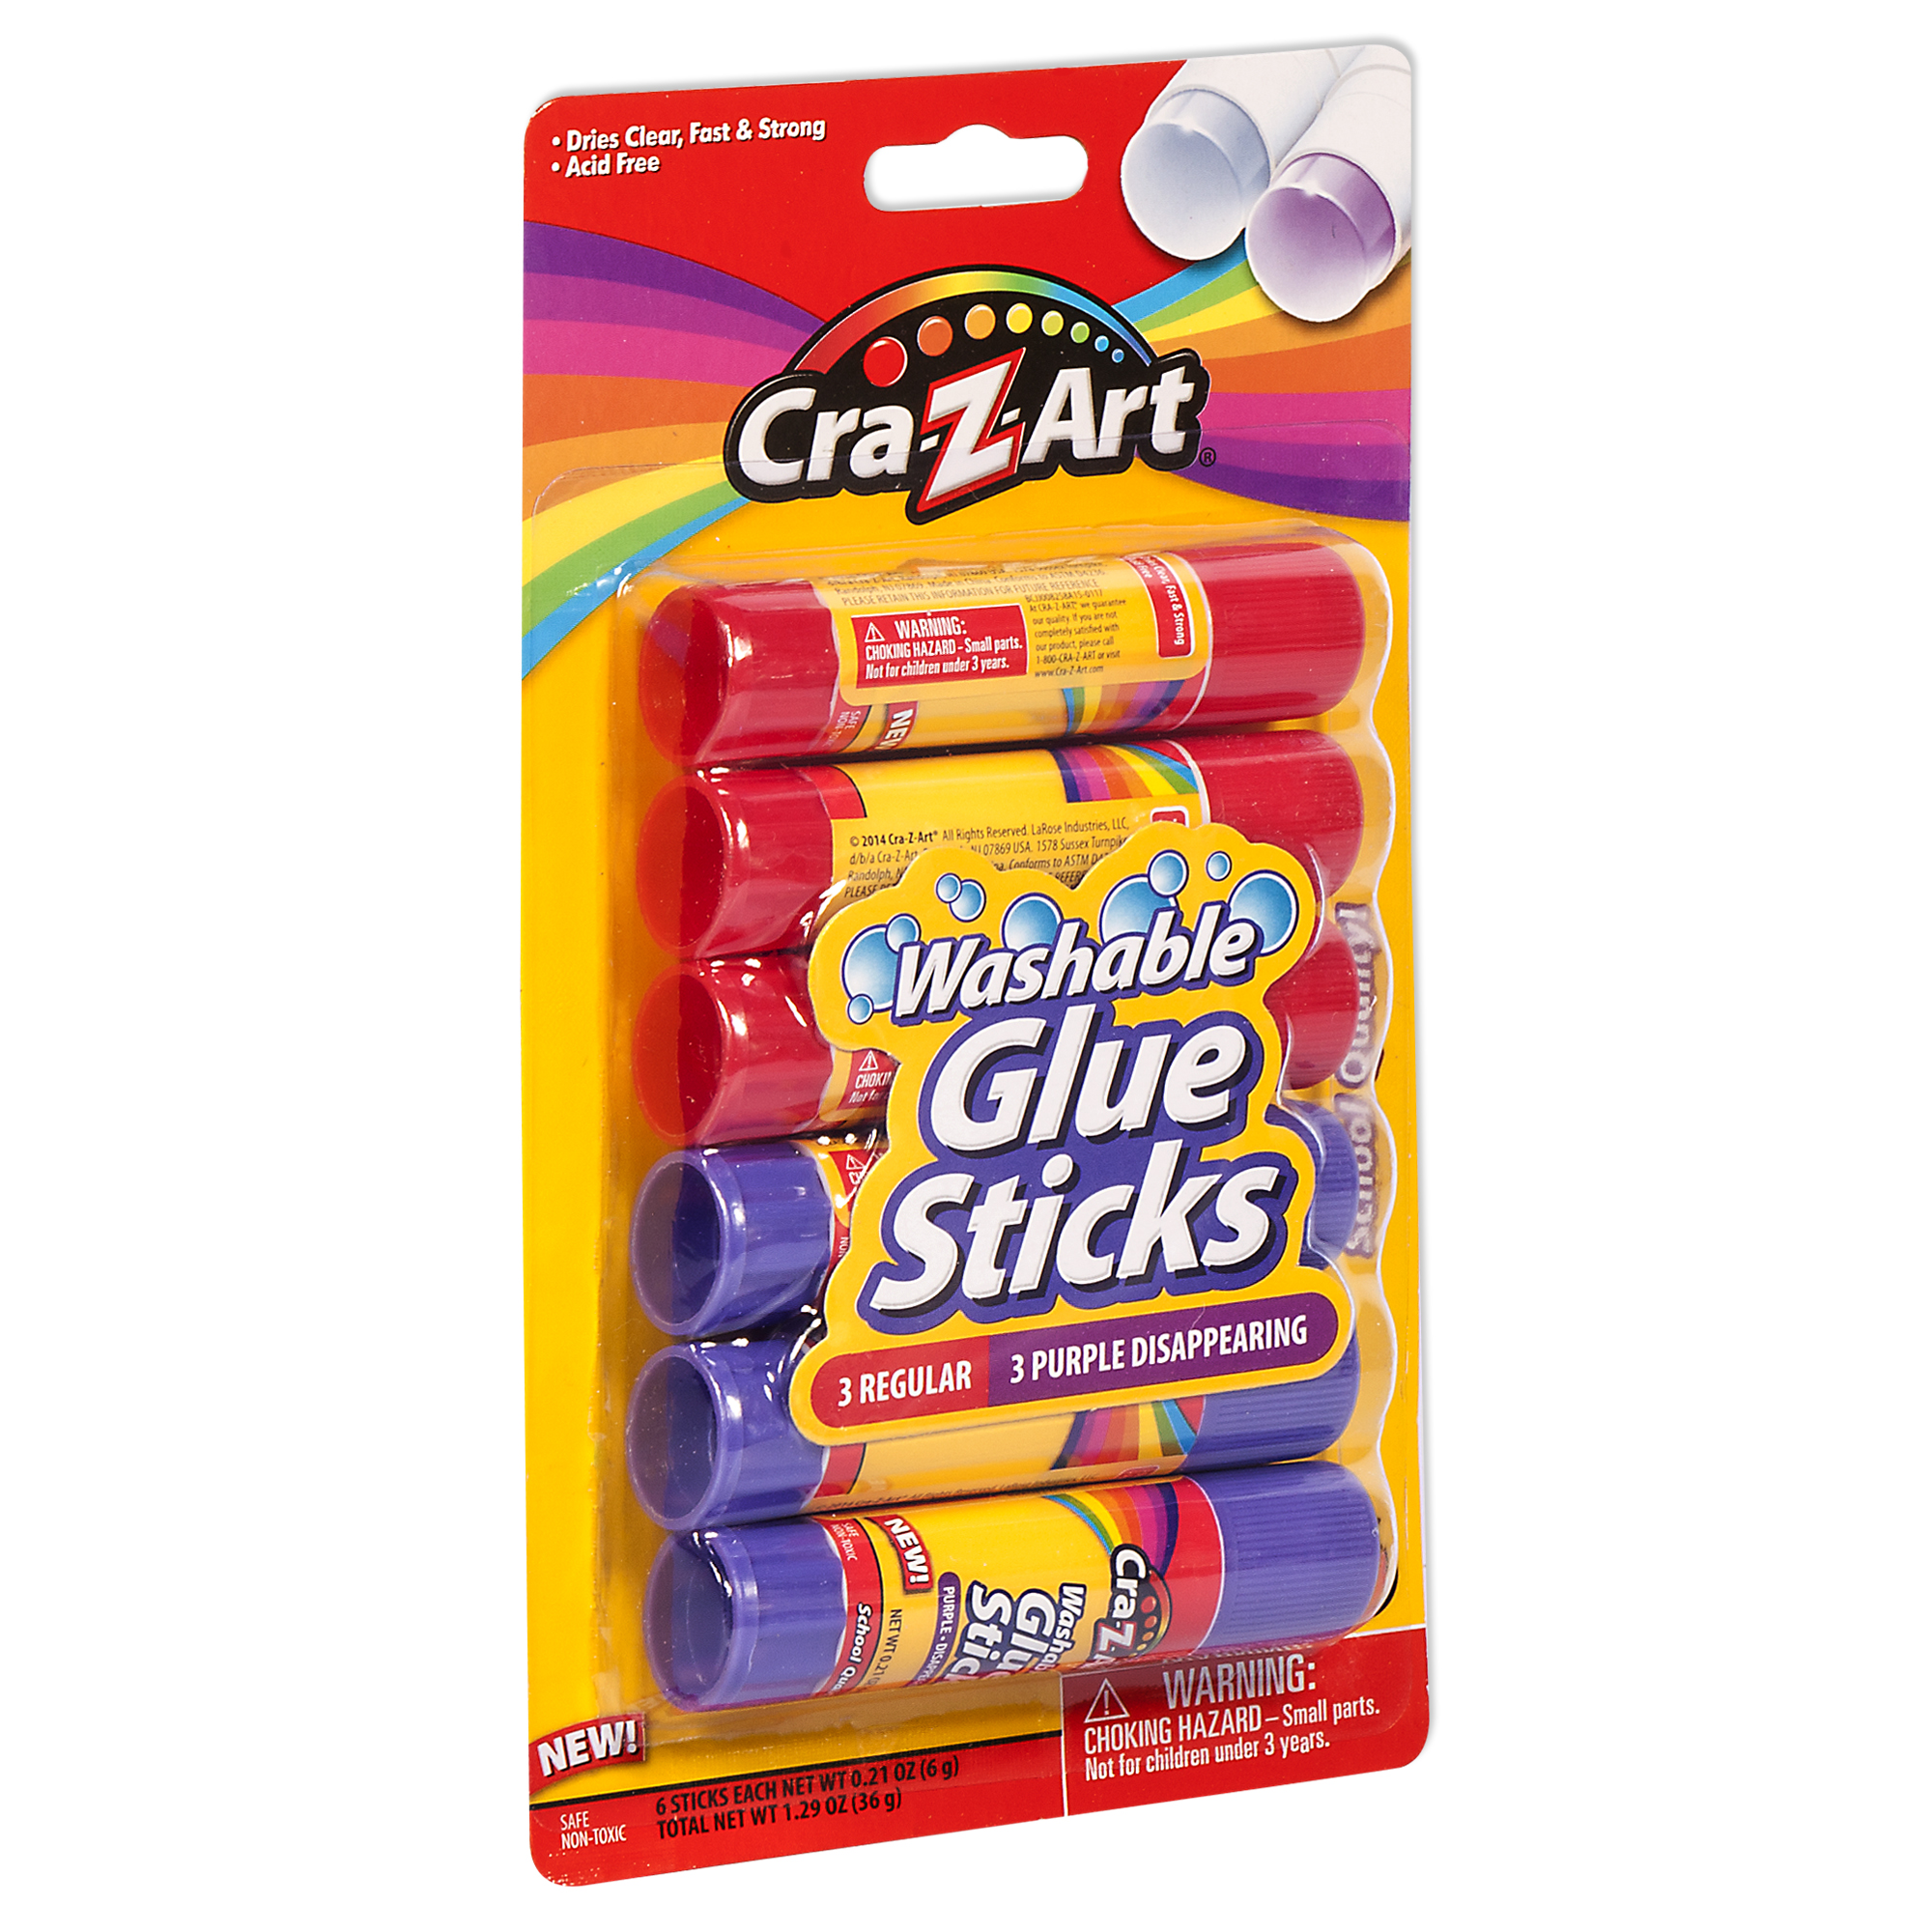 Cra-Z-Art Washable Glue Sticks, Disappearing Purple, 6 Count, Total Weight 1.29oz - image 3 of 9